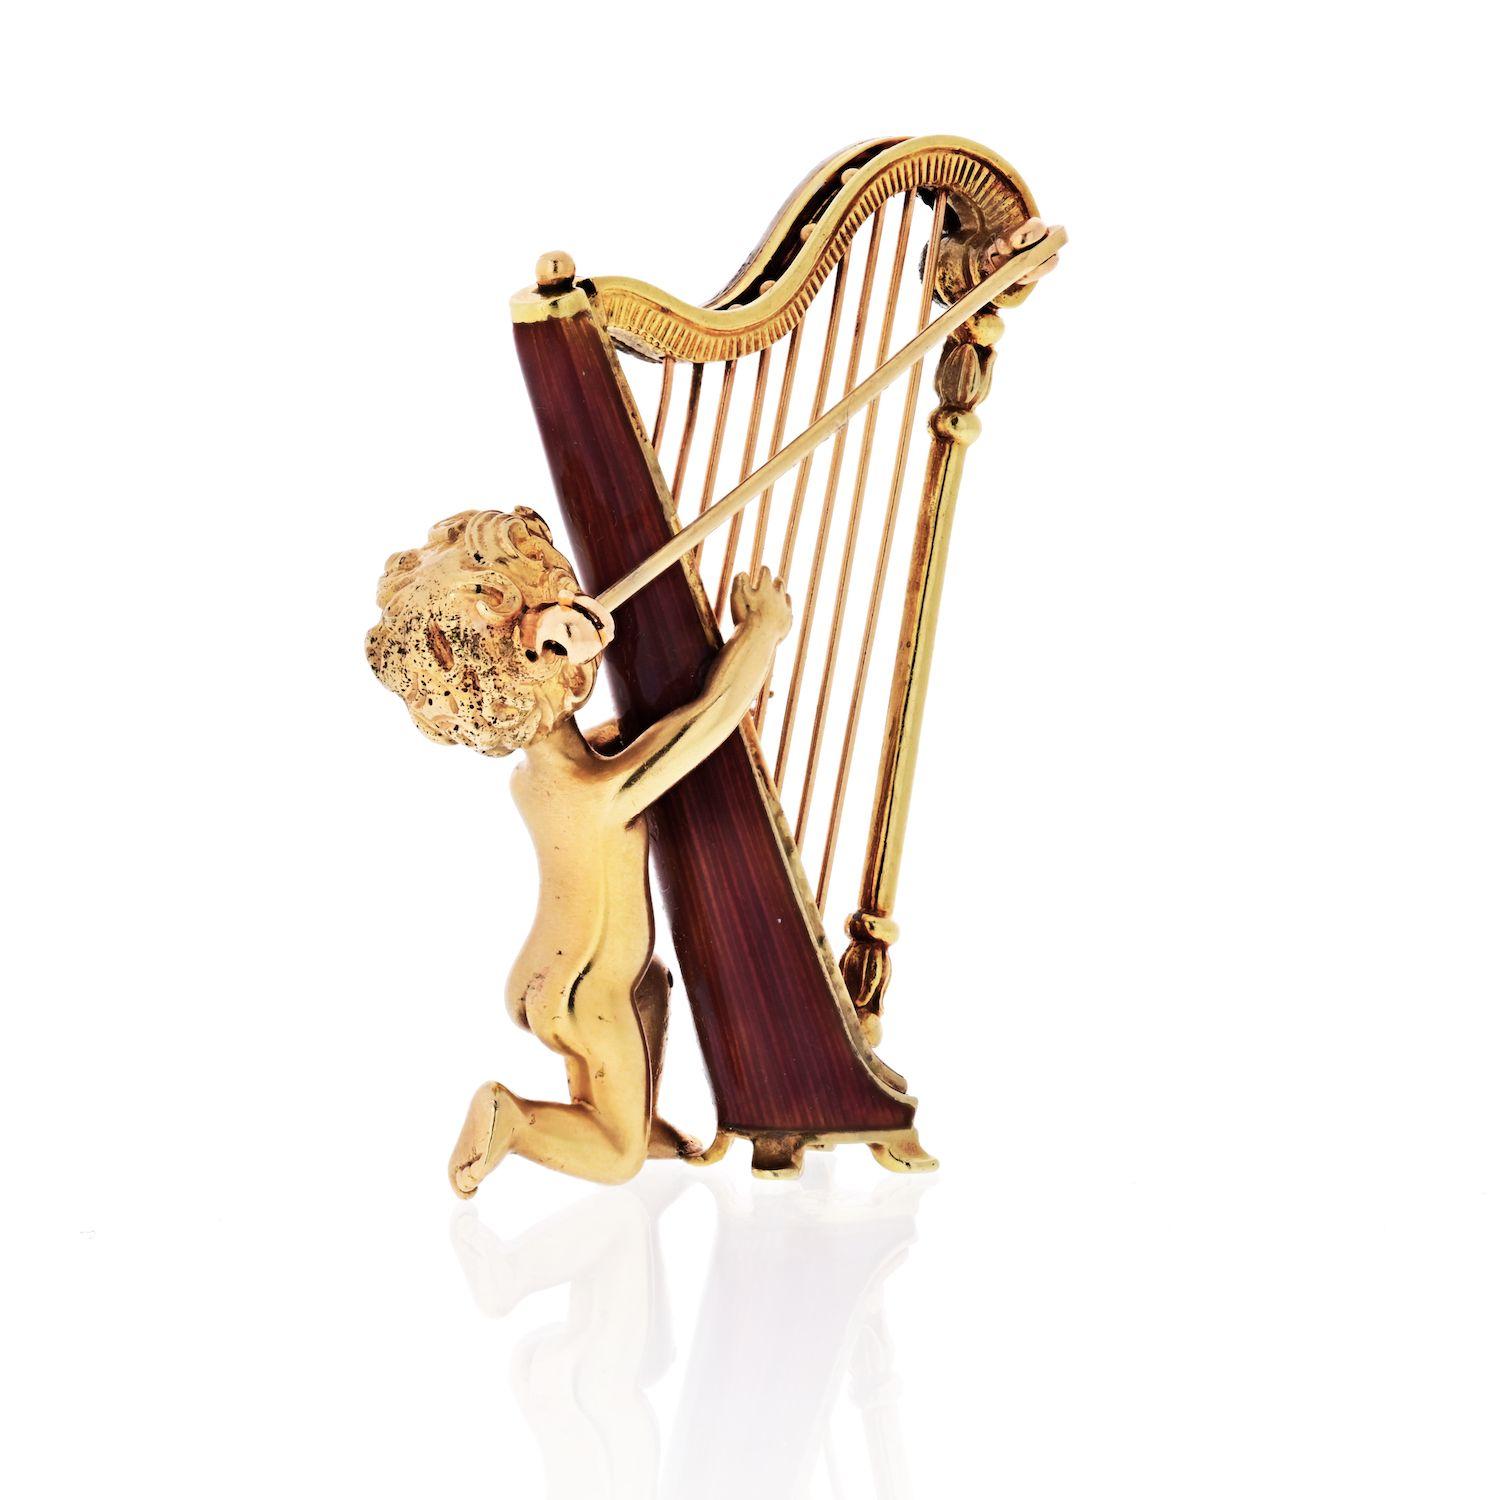 Retro circa 1940s Ruser 14k gold brooch, depicting a Cherub playing harp, decorated with sapphire eyes and approx. 0.20ctw in diamonds. Measures 45mm x 30mm. Irresistible, mischievous, and often a trouble maker. Where Cupid is, love will